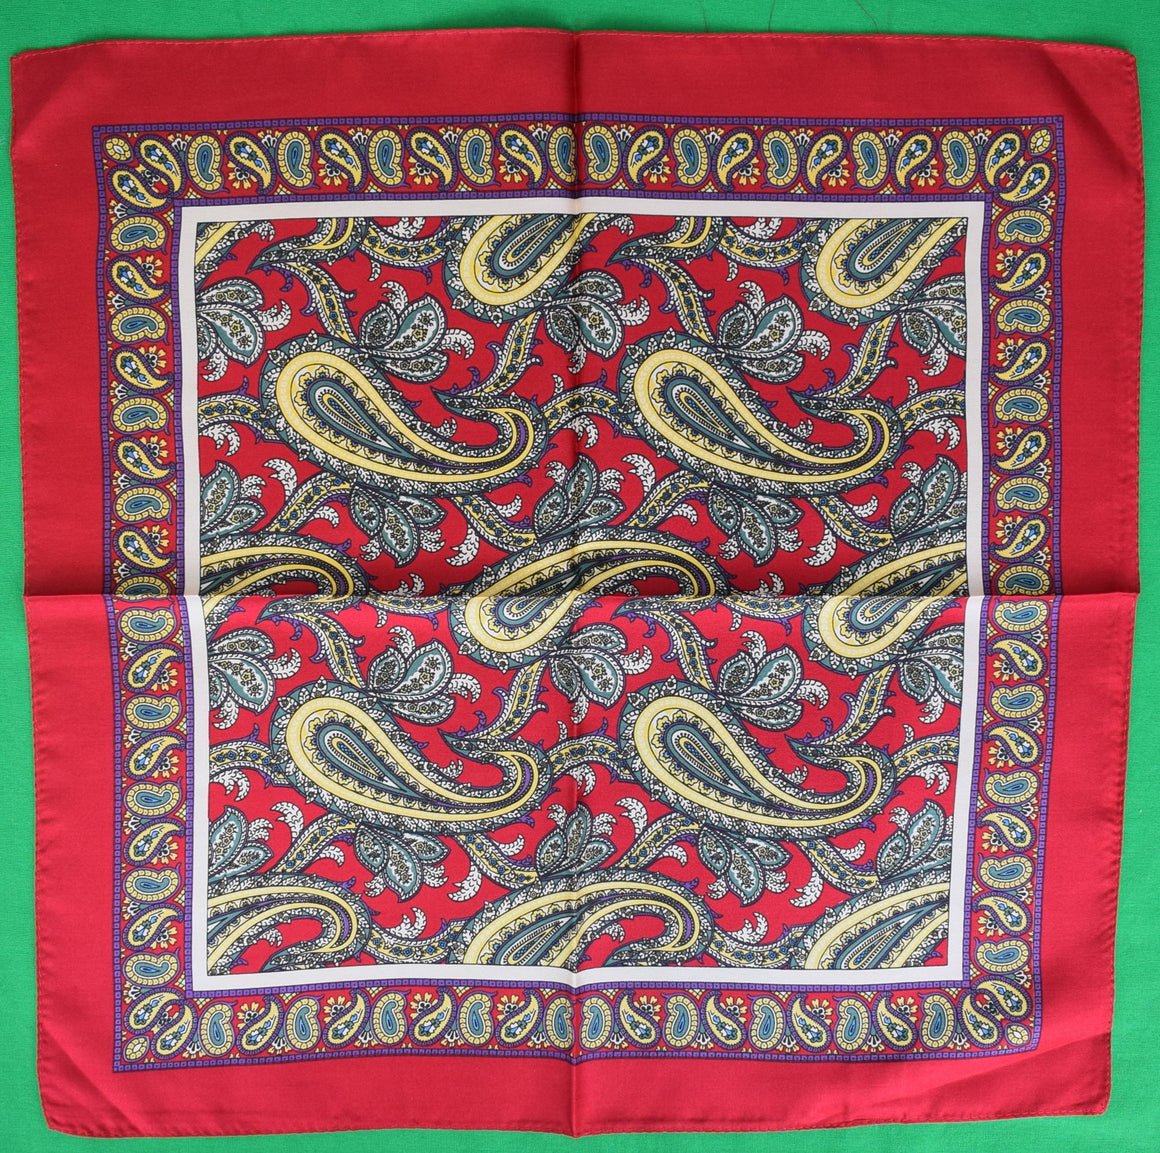 "Macclesfield Red Paisley Antique English Silk c1950s Pocket Square"